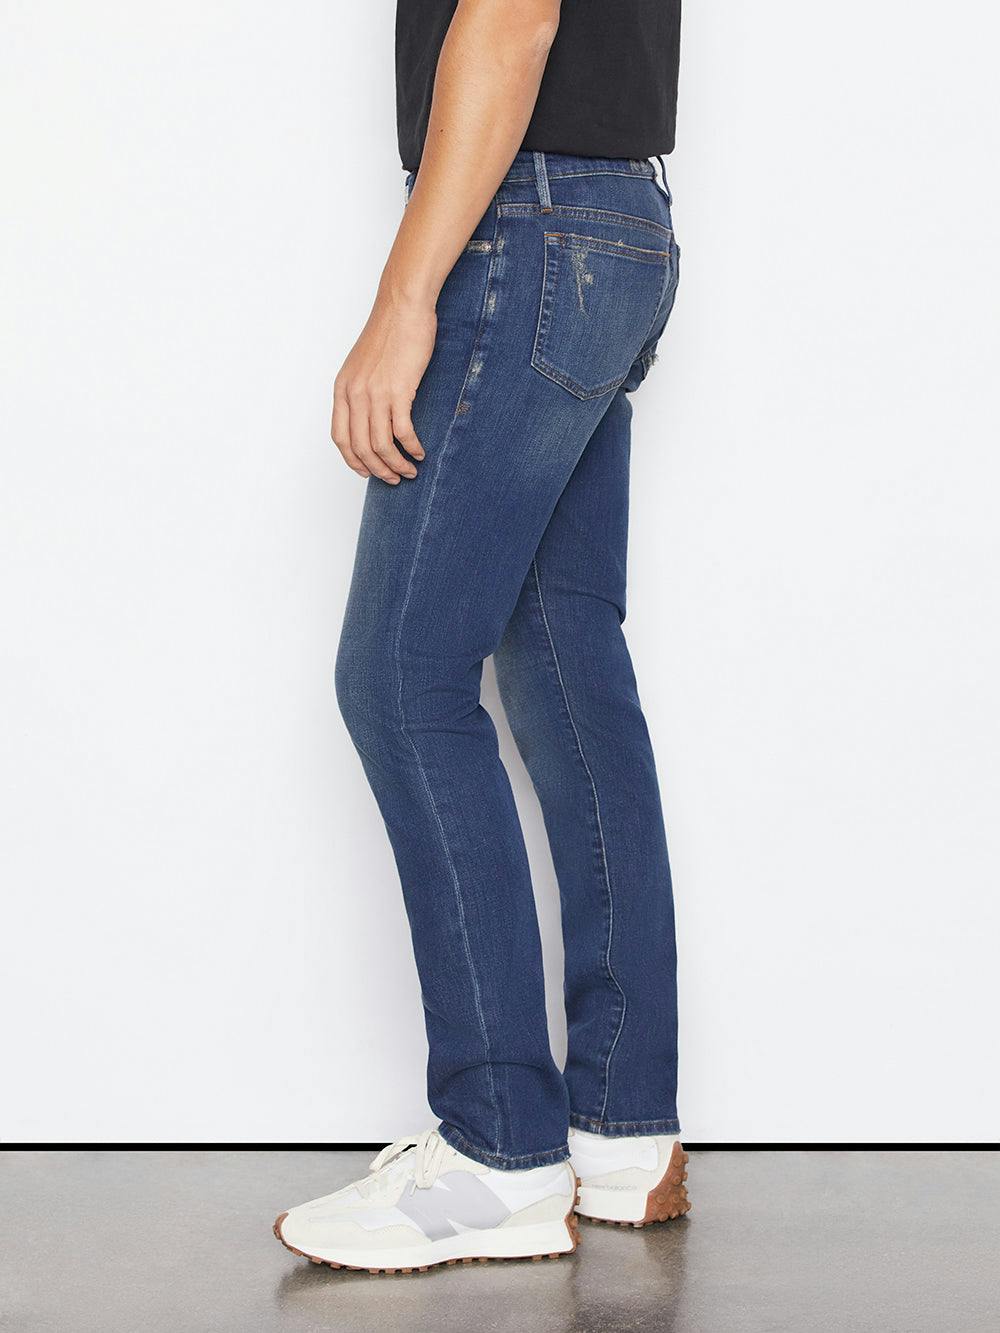 jeans side view